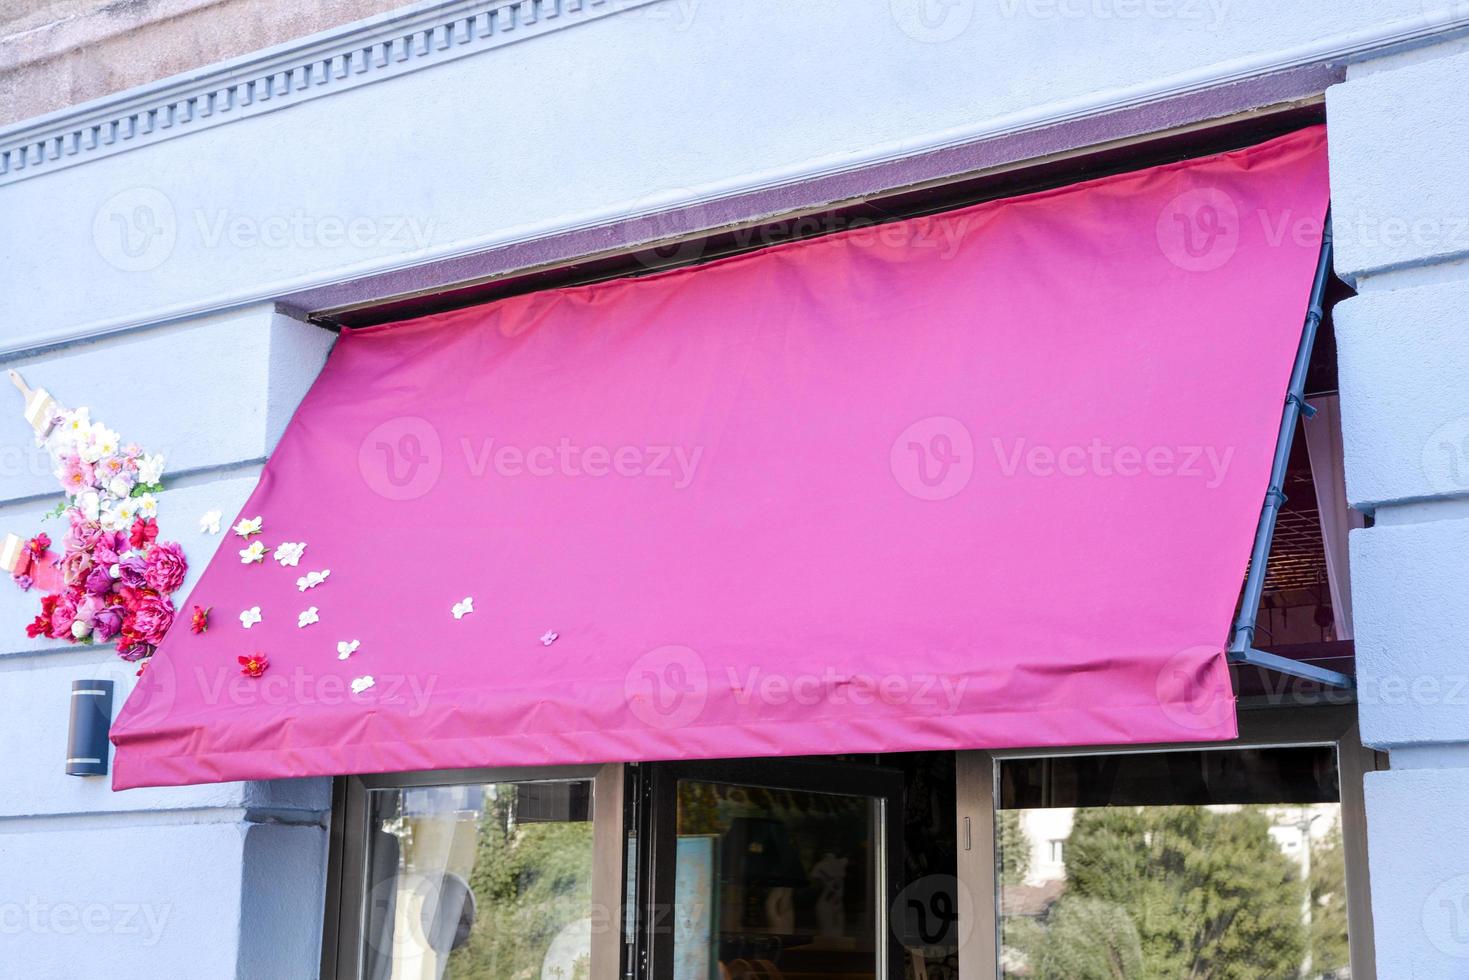 Clean pink awning with flowers for logo, text presentation mockup photo